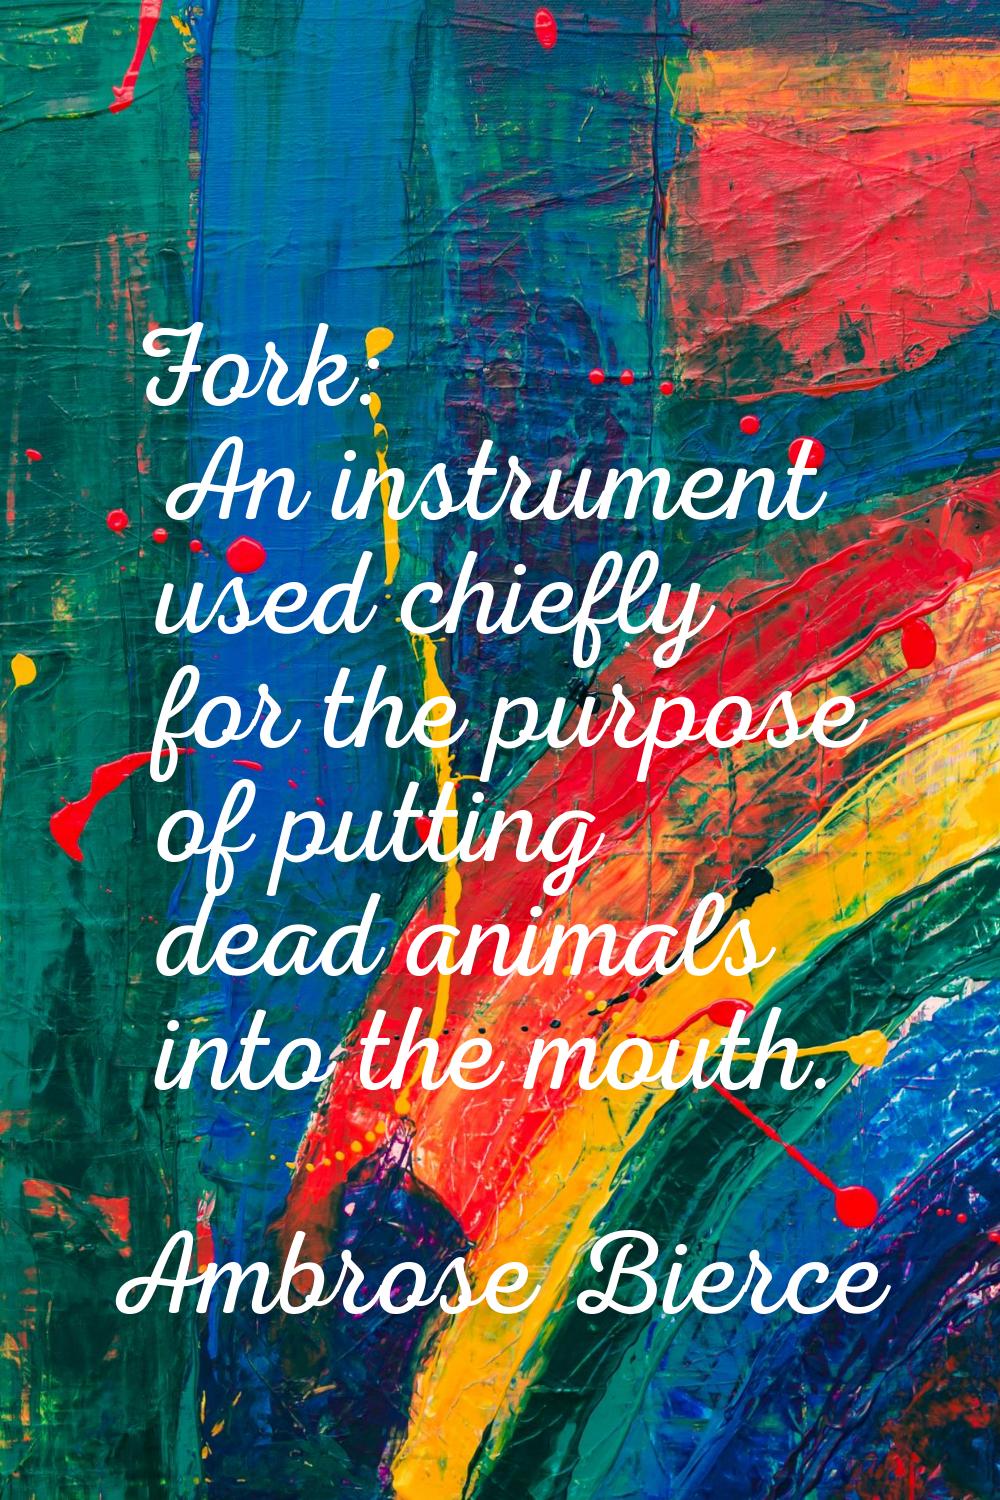 Fork: An instrument used chiefly for the purpose of putting dead animals into the mouth.